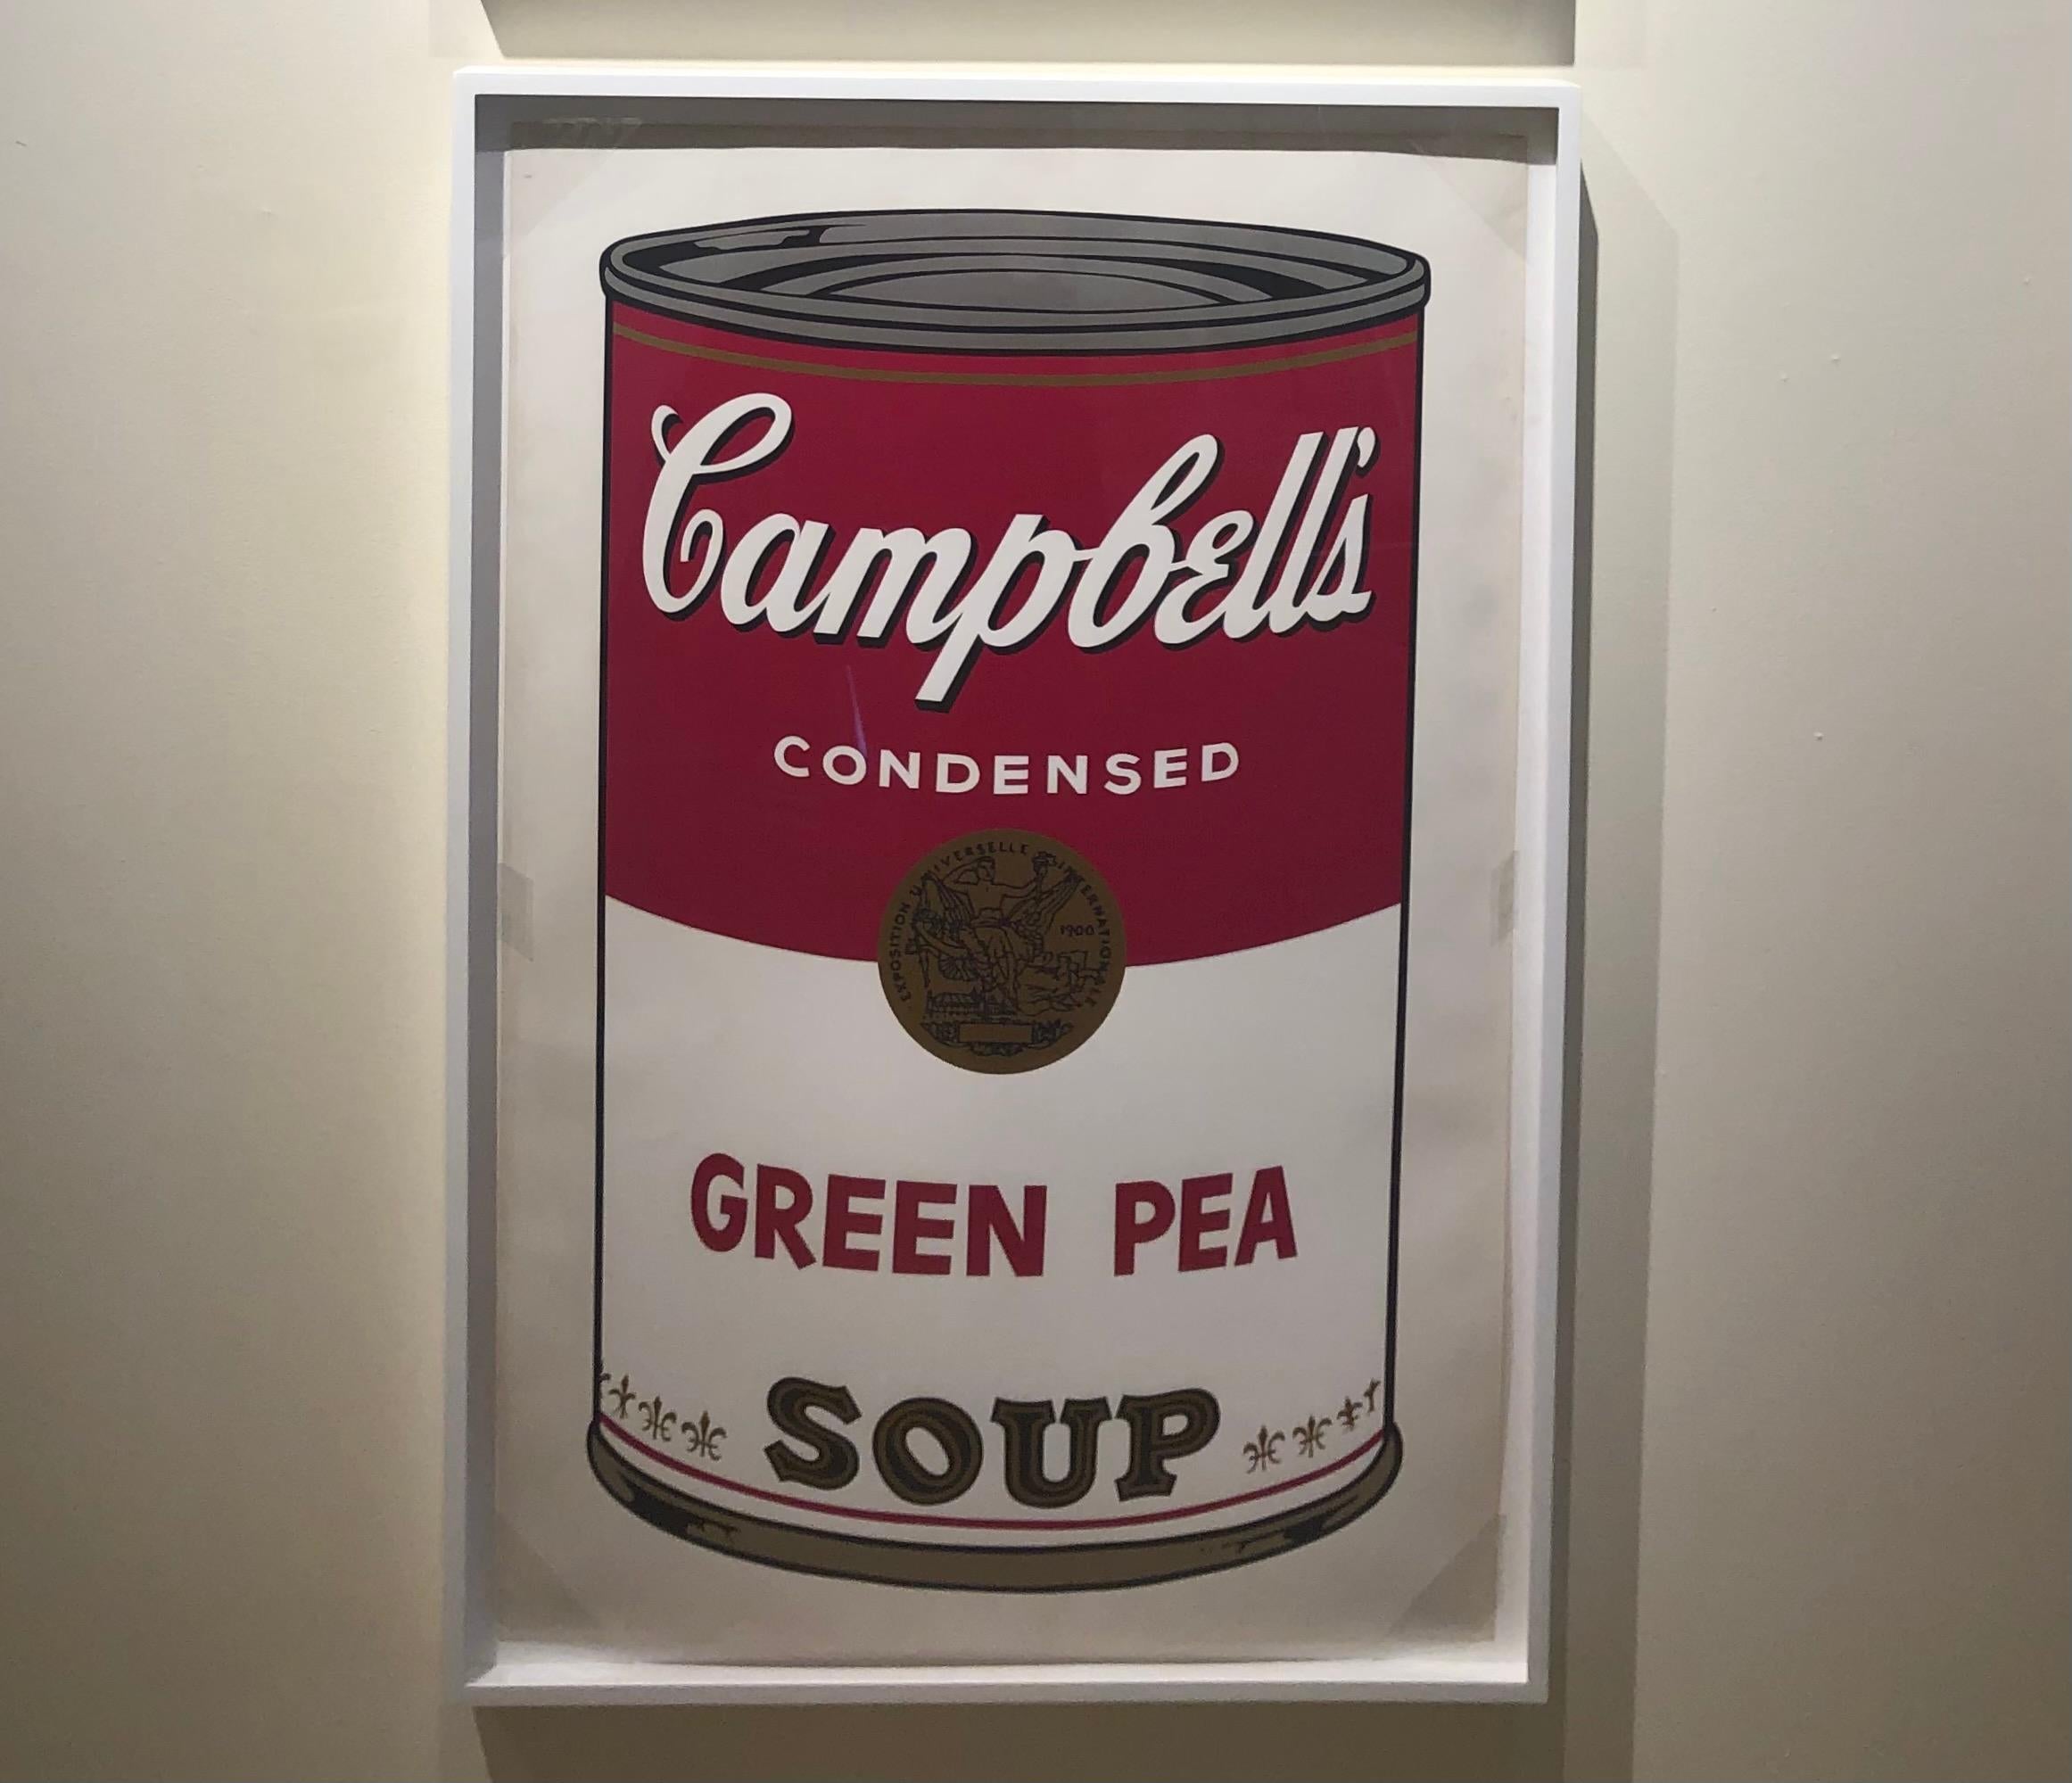 Green Pea from Campbell's Soup I, F&S II.50 - Contemporary Print by Andy Warhol